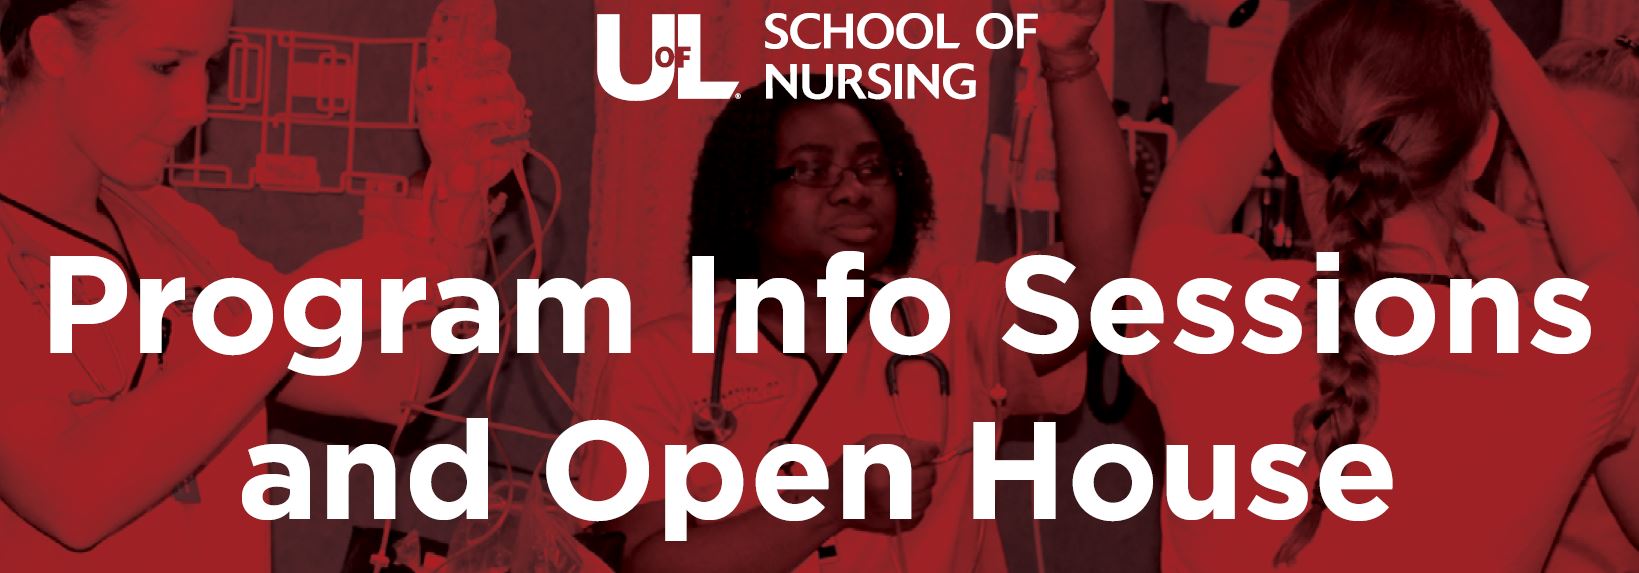 School of Nursing Info Sessions and Open House on March 6